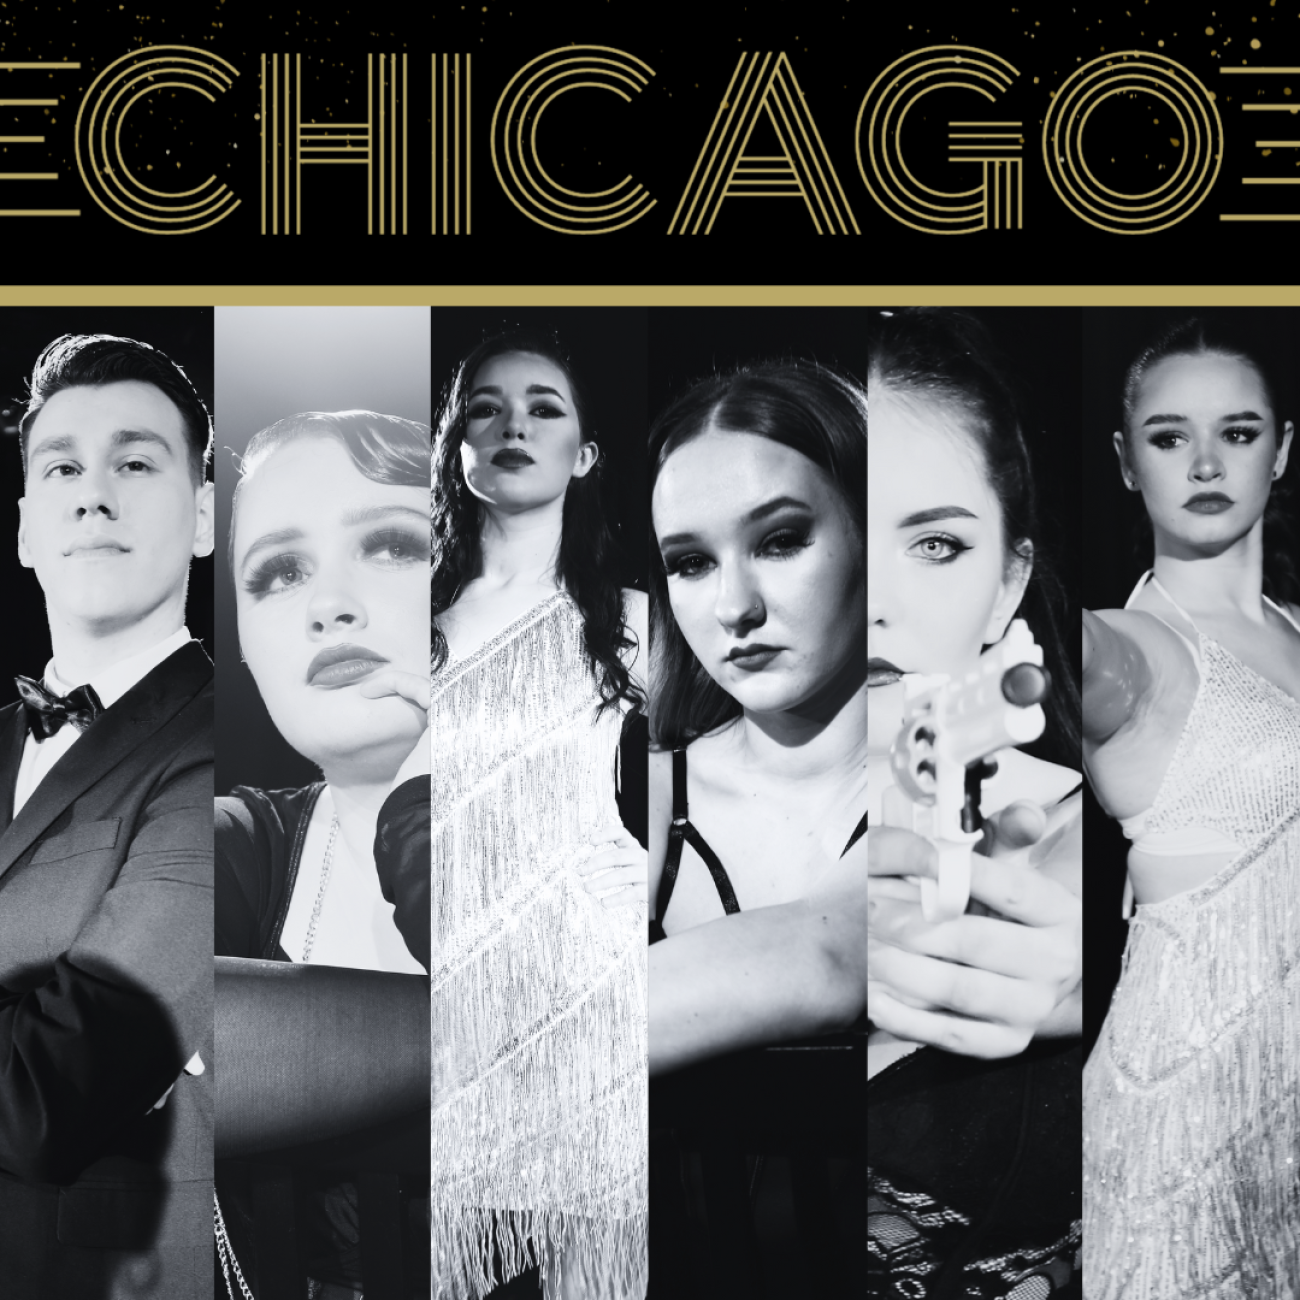 Weston College Performing Arts course perform Chicago